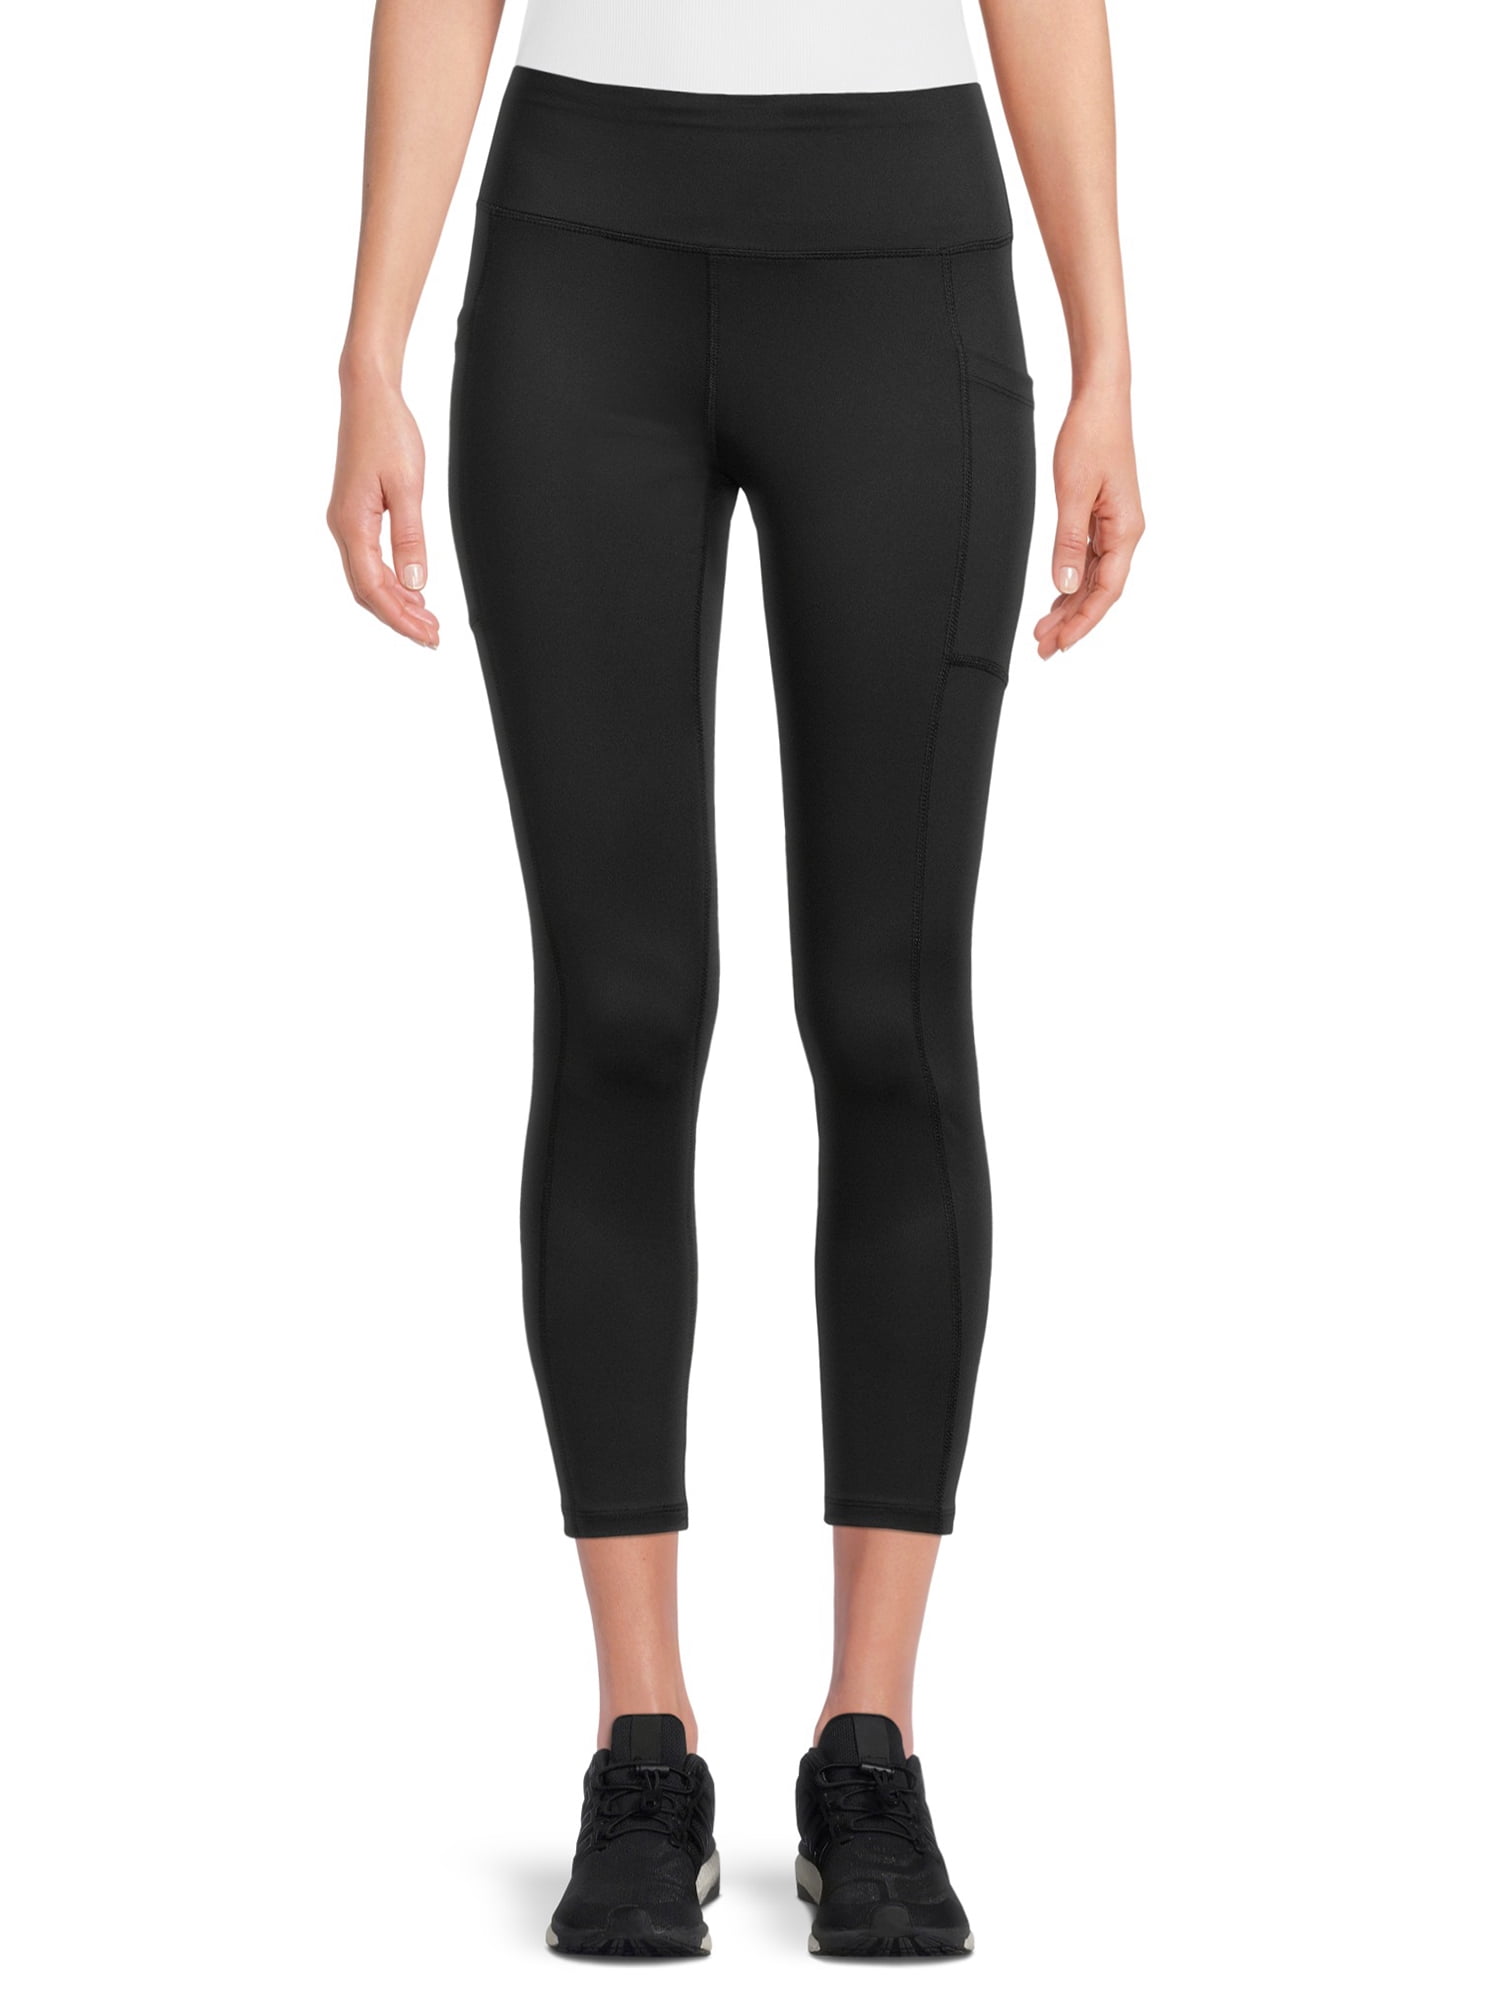 Avia Women's Performance Ankle Tights with Side Pockets 